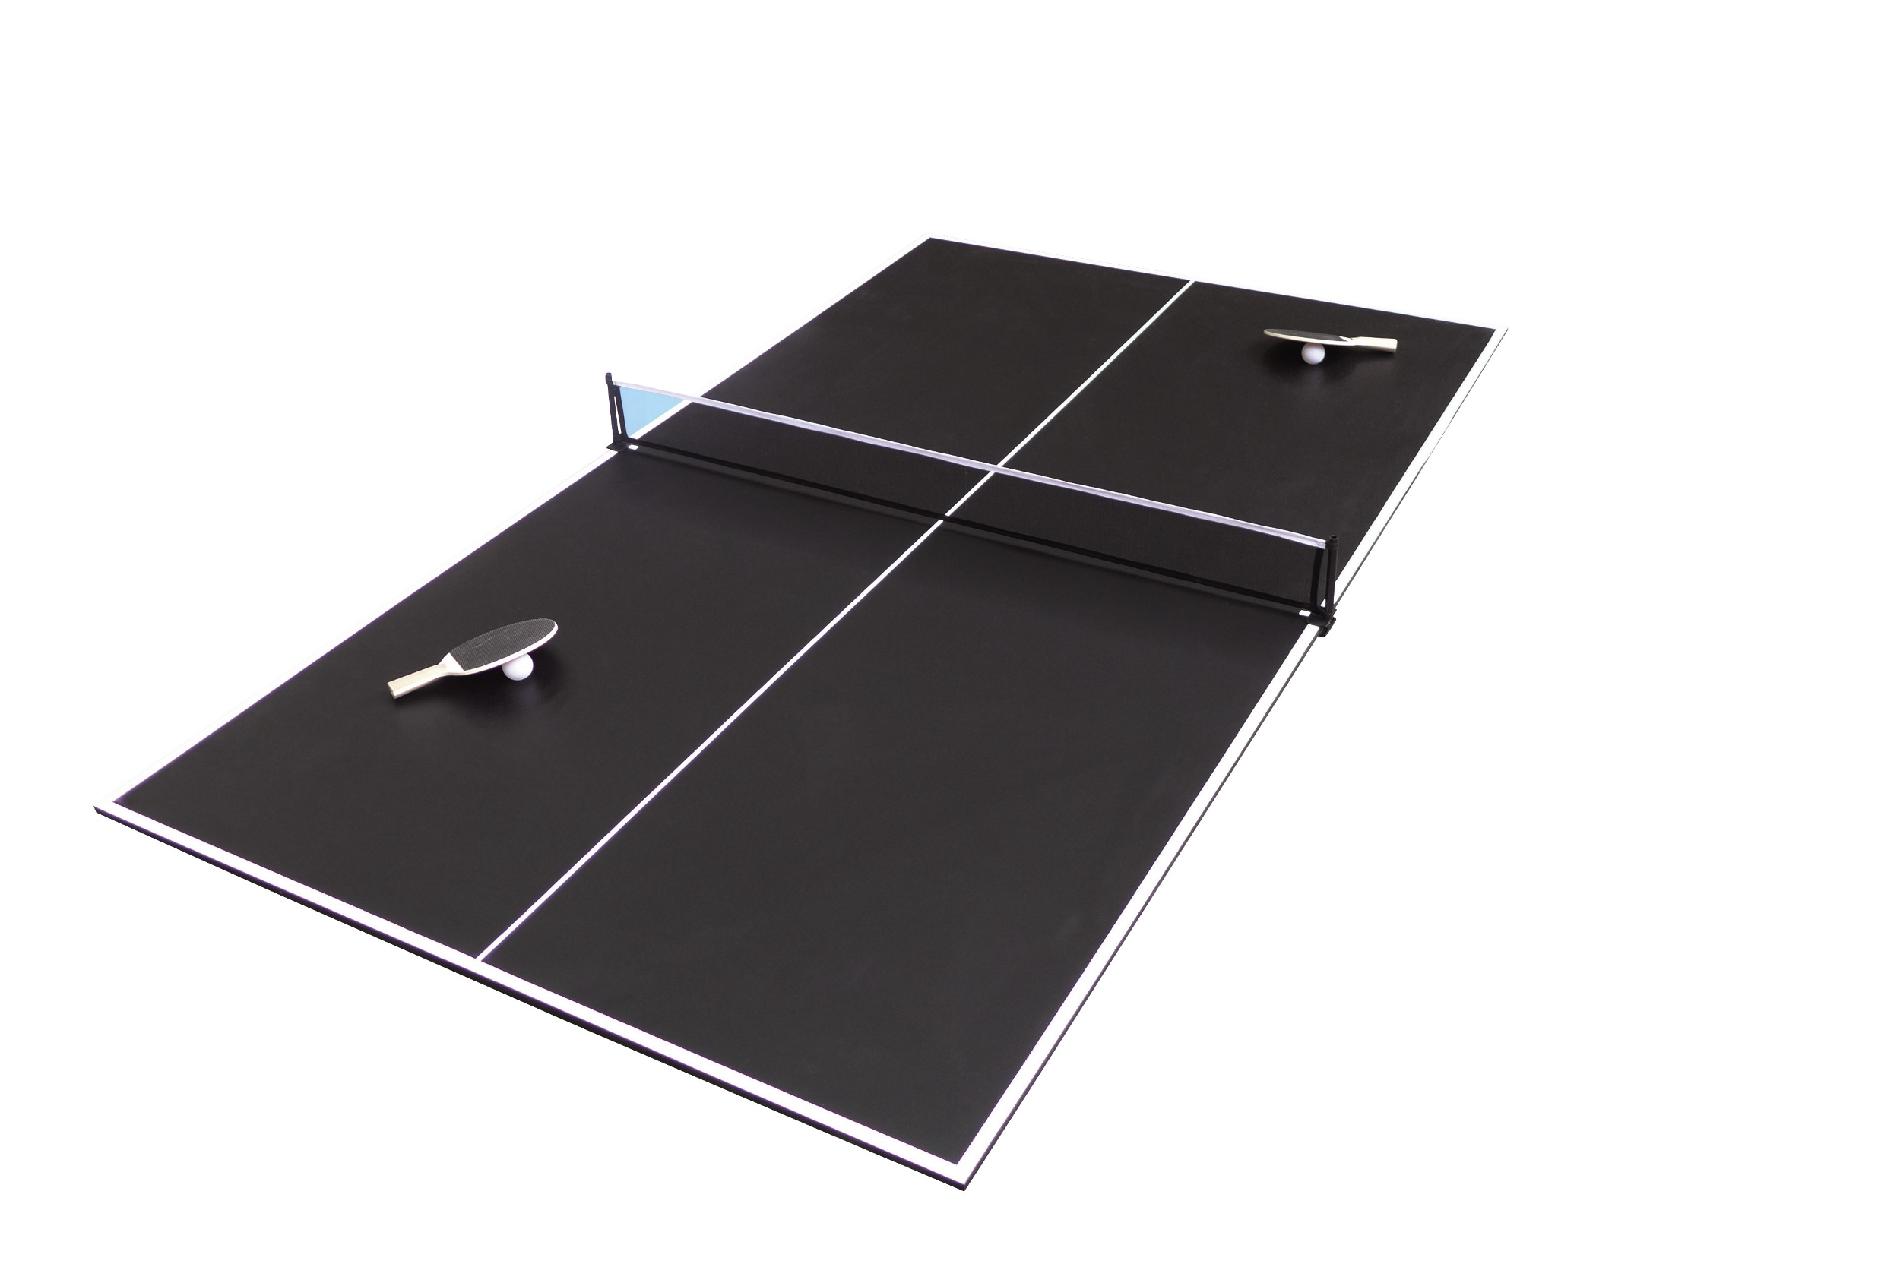 Sportcraft 64684 7 Ft Classic Electronic Air Hockey Table